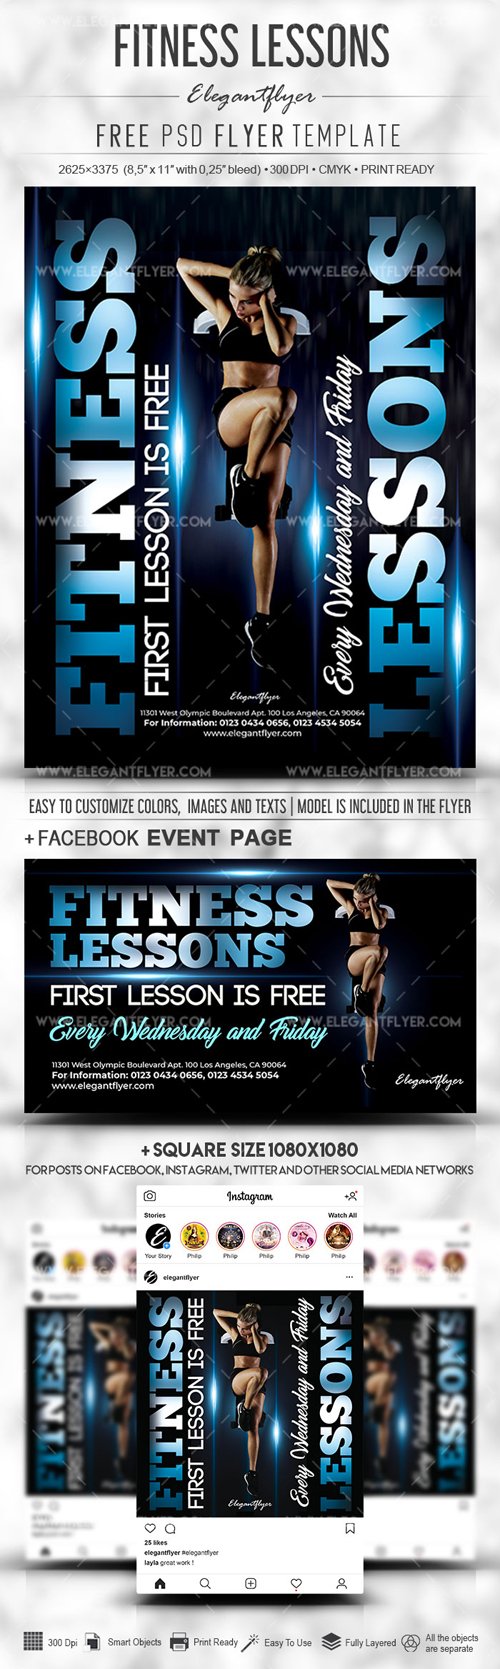 Fitness Lessons - Free PSD Flyer Template + Facebook Cover